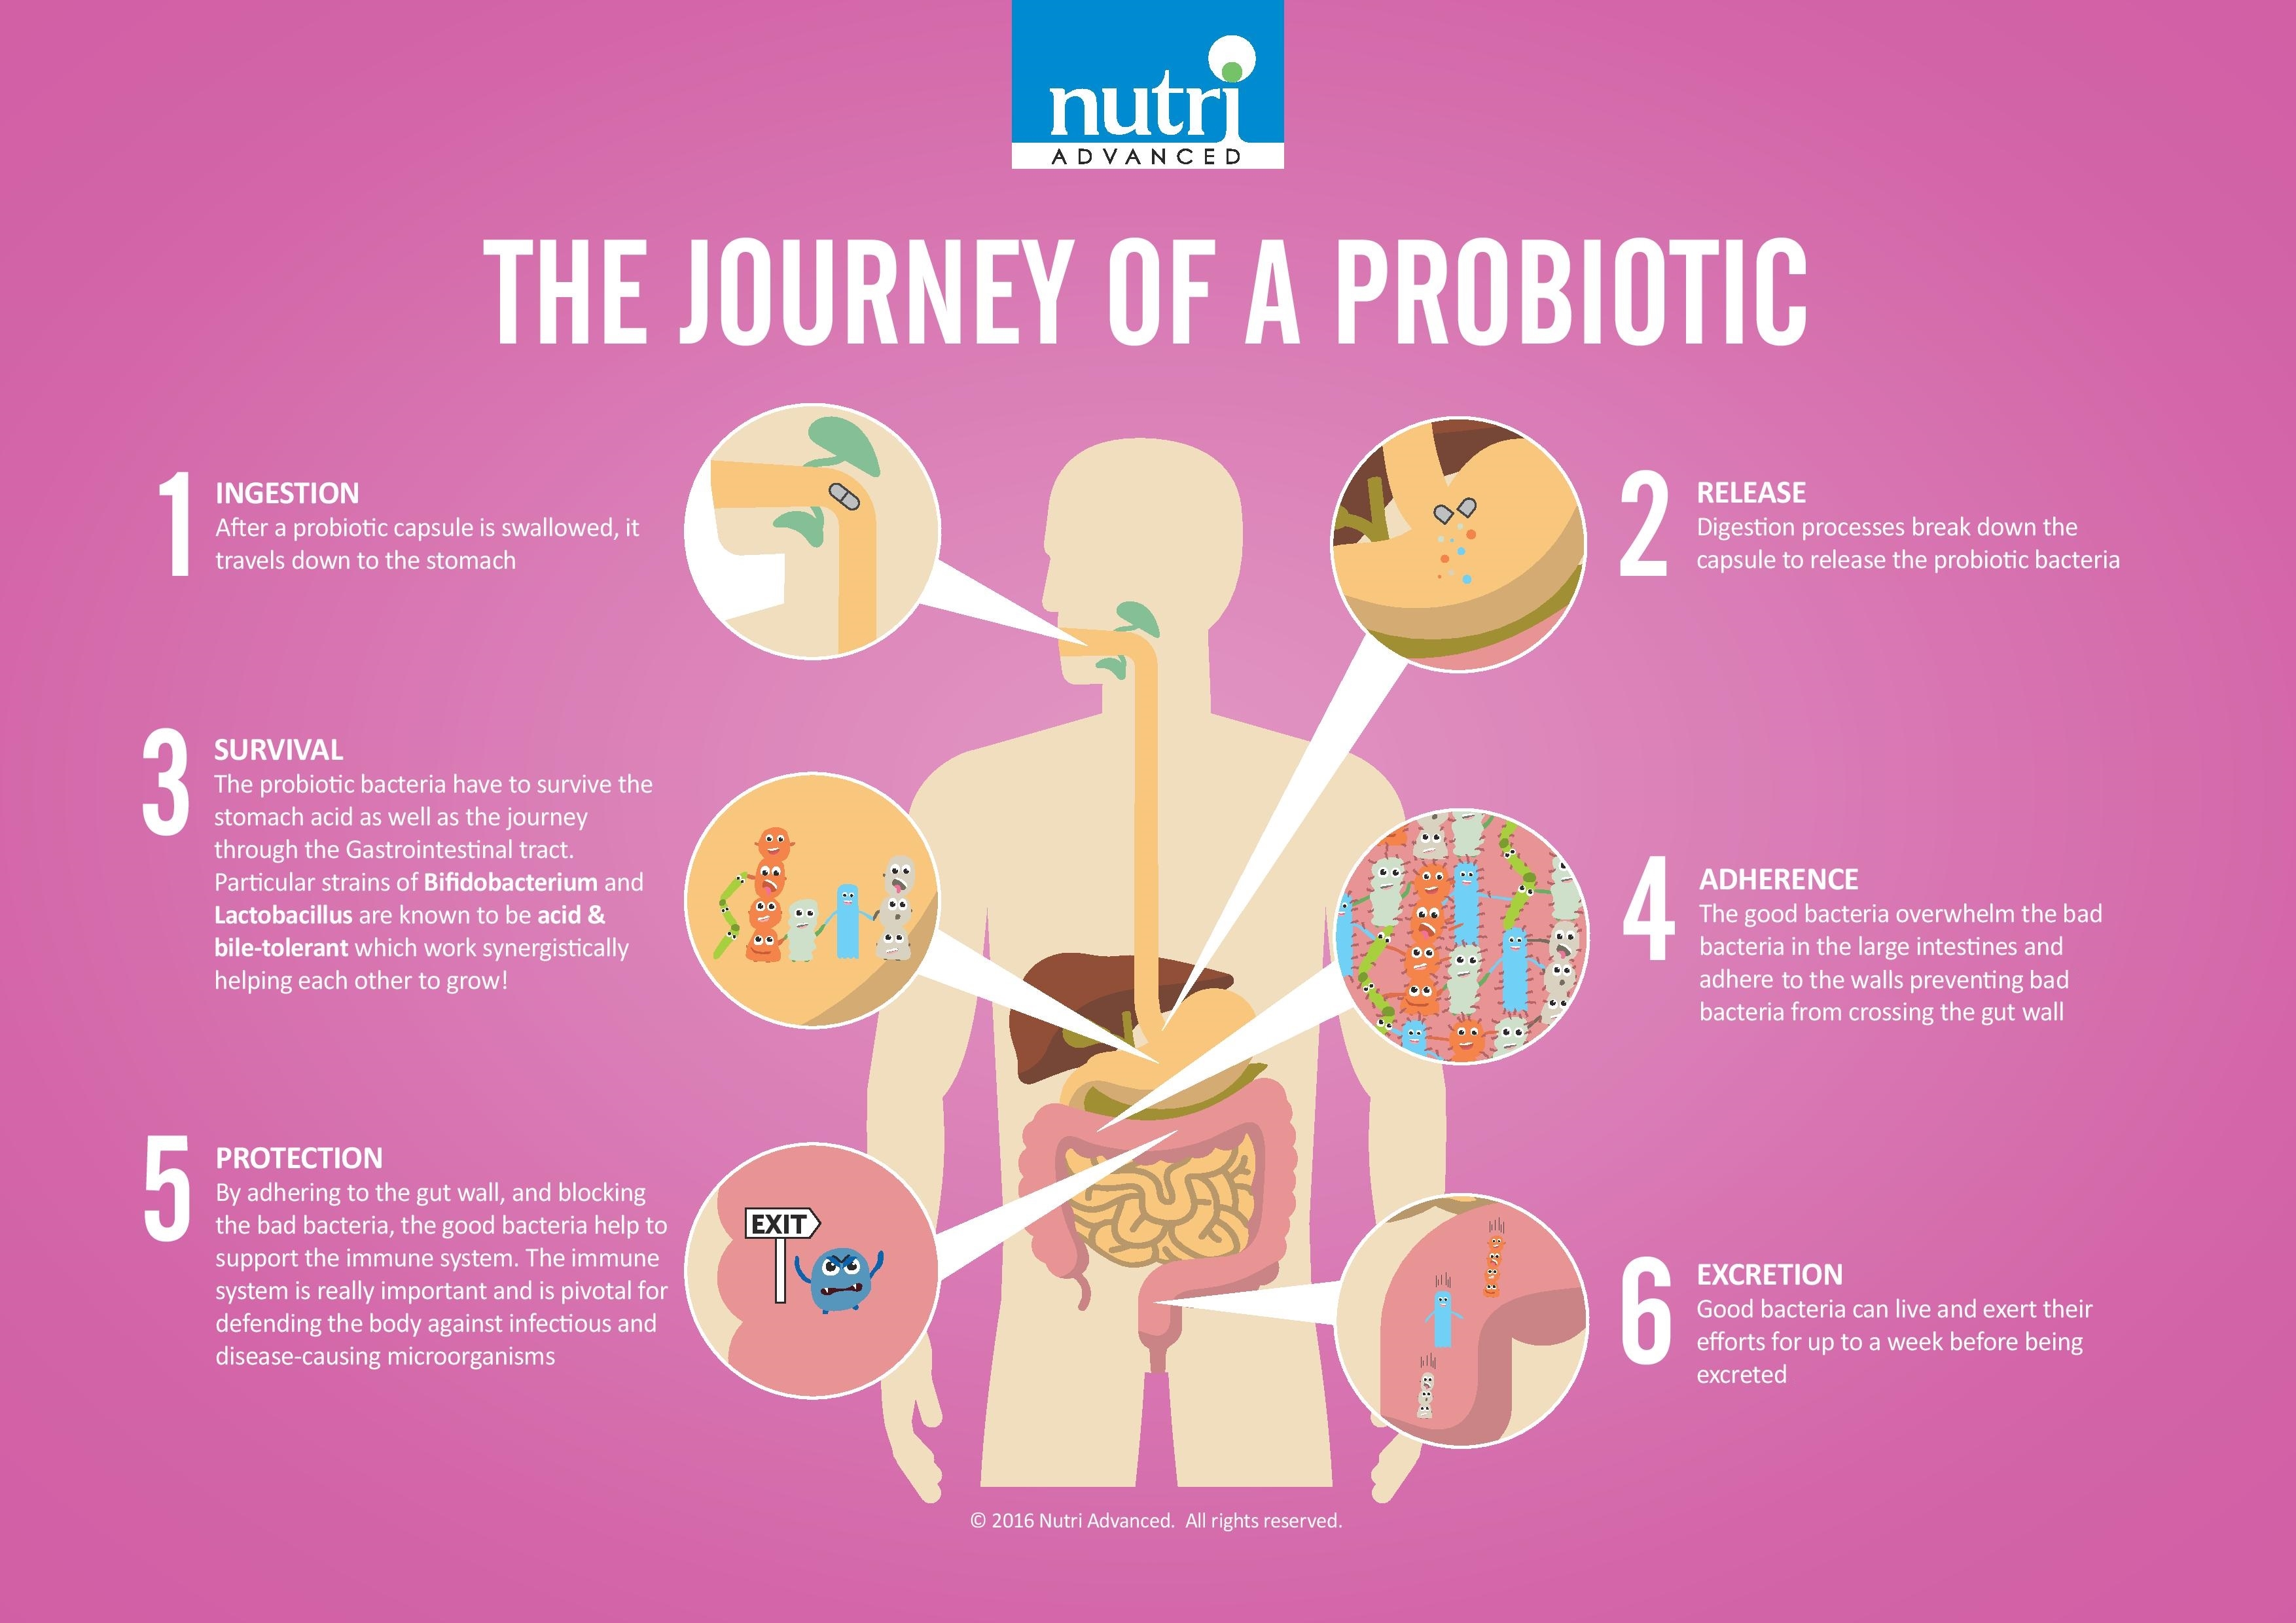 Clearing up the Confusion around Probiotics | True Health magazine